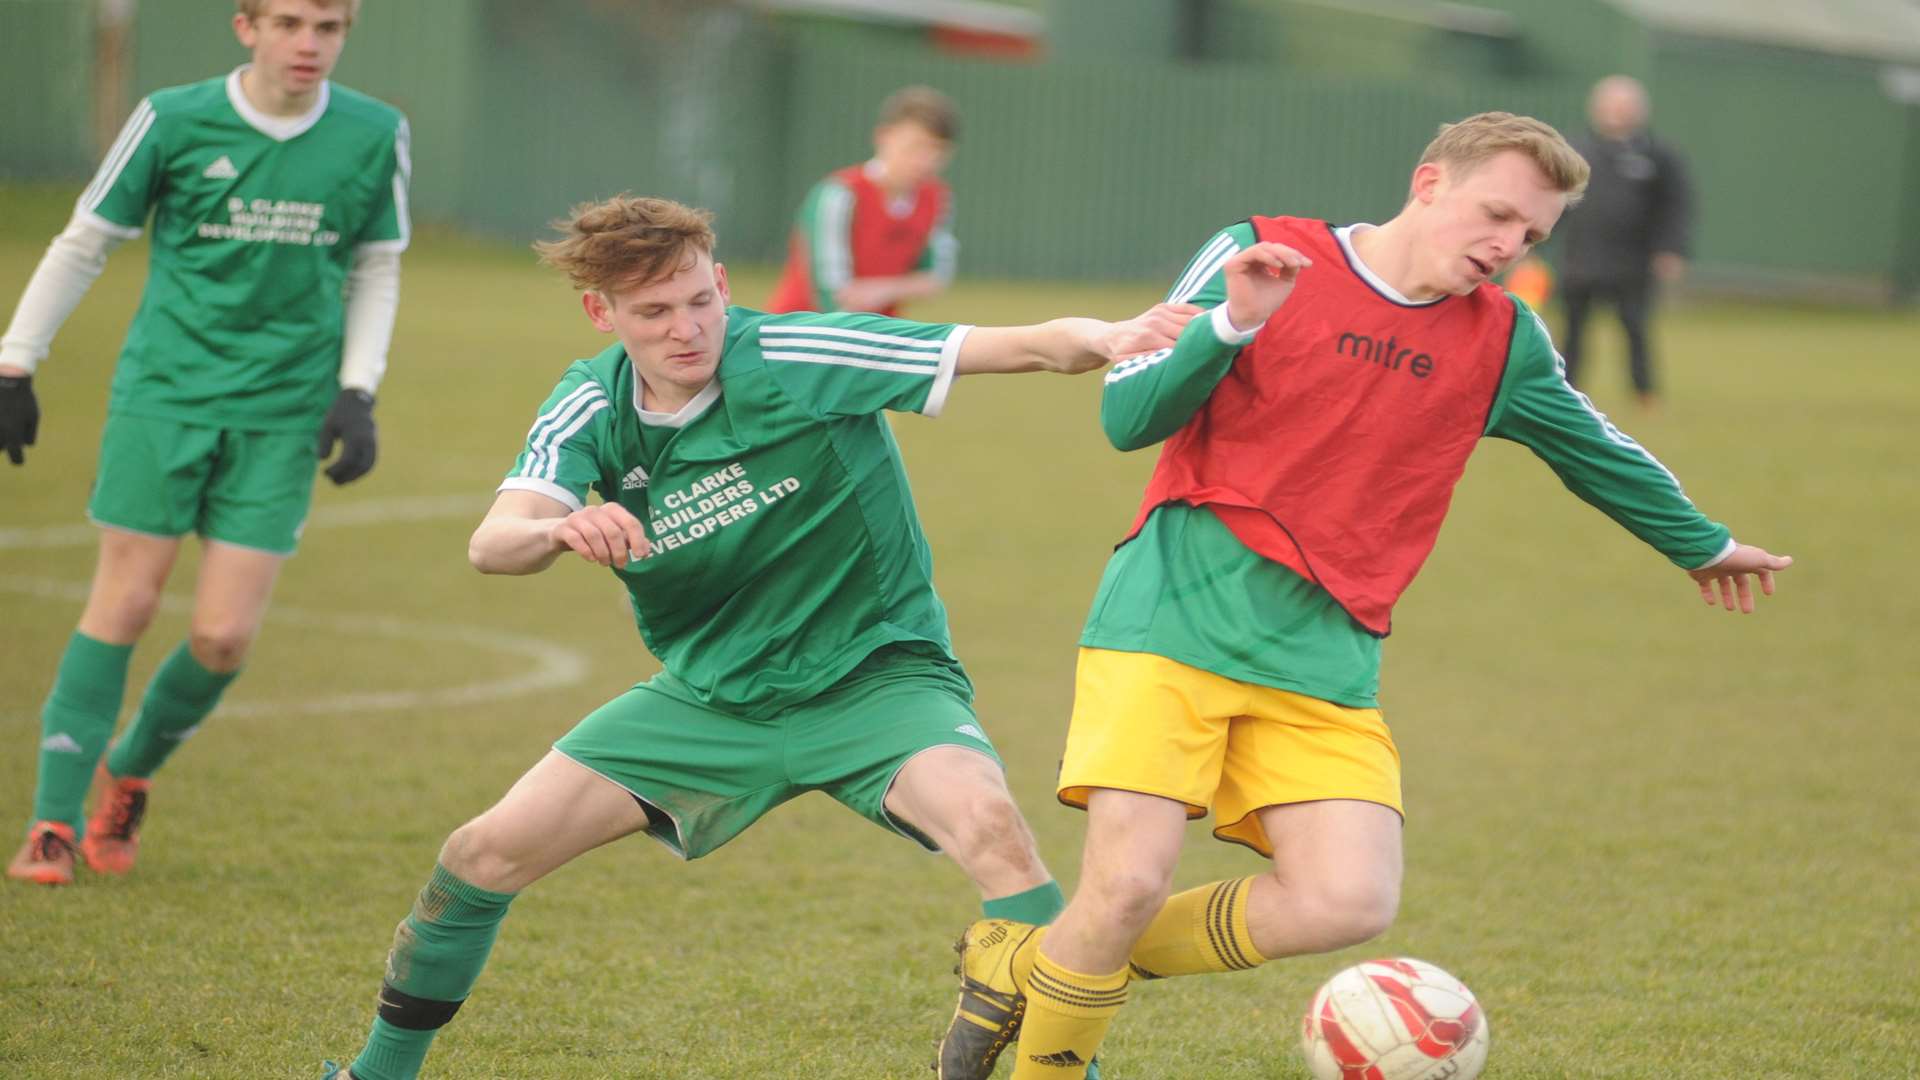 Cliffe Woods Colts get ahead of Eagles Green in Under-18 Division 1 Picture: Steve Crispe